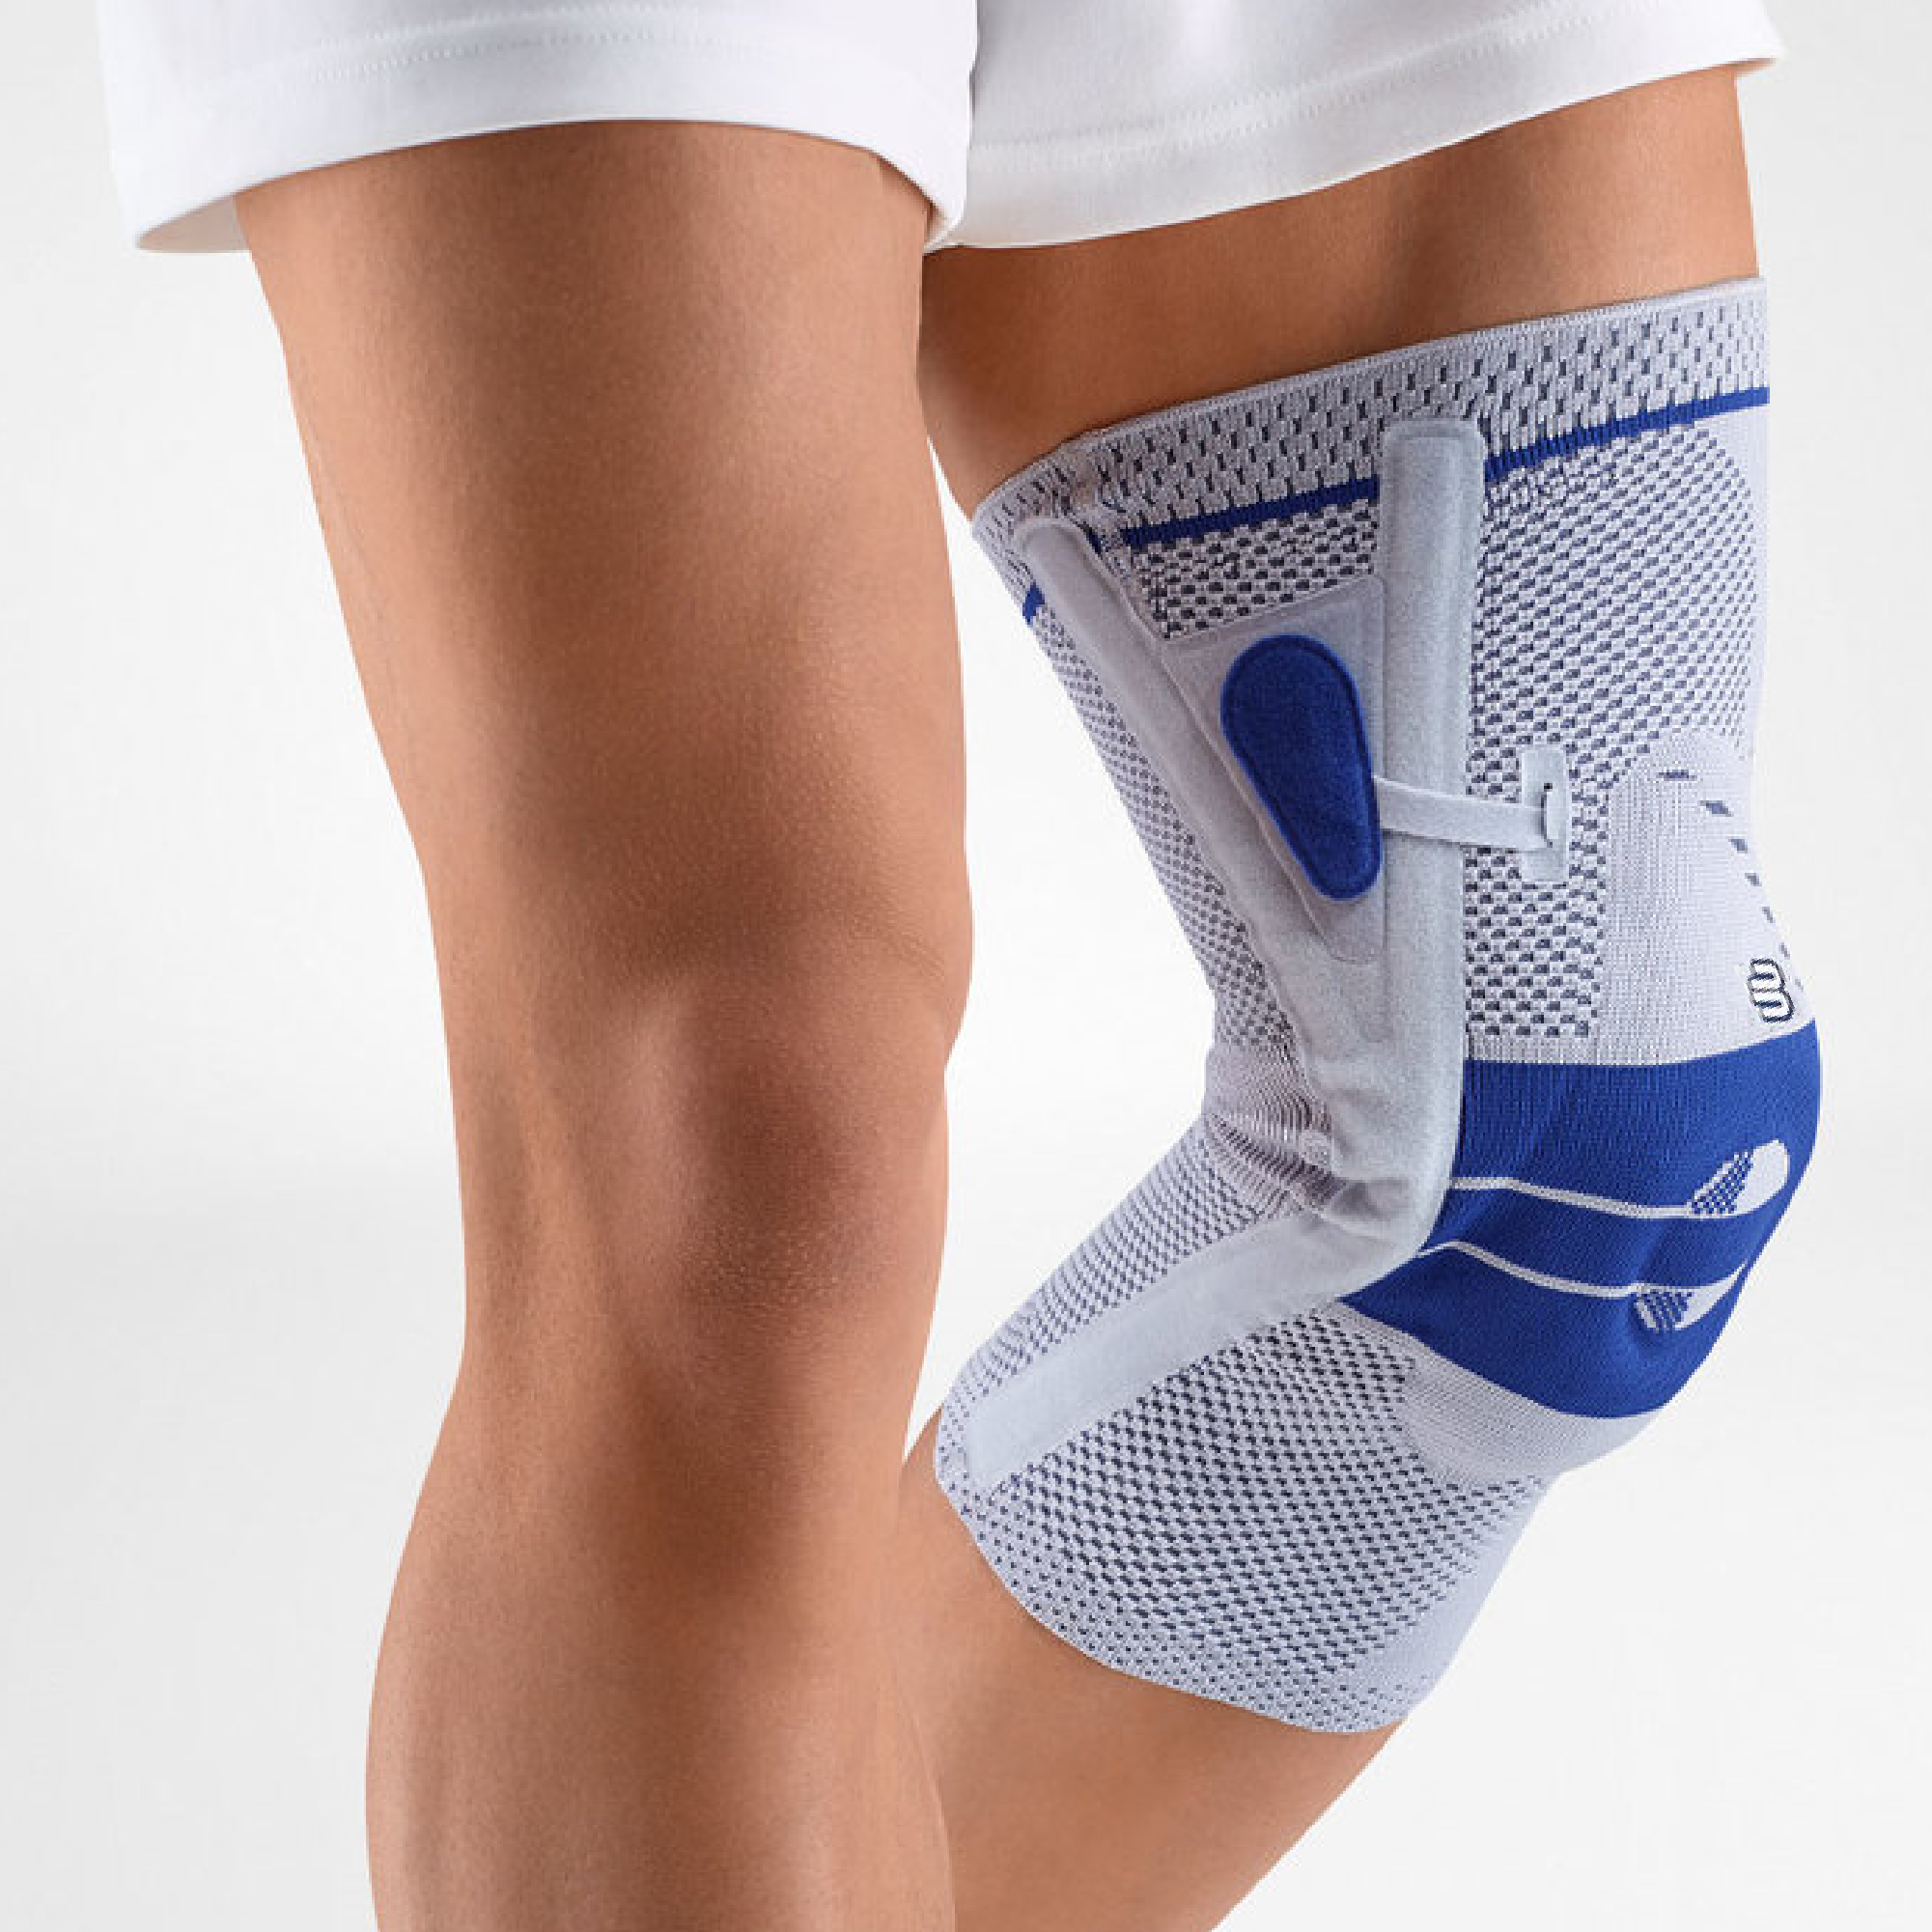 Knee Braces And Supports The Bone Store Best Selection And Service